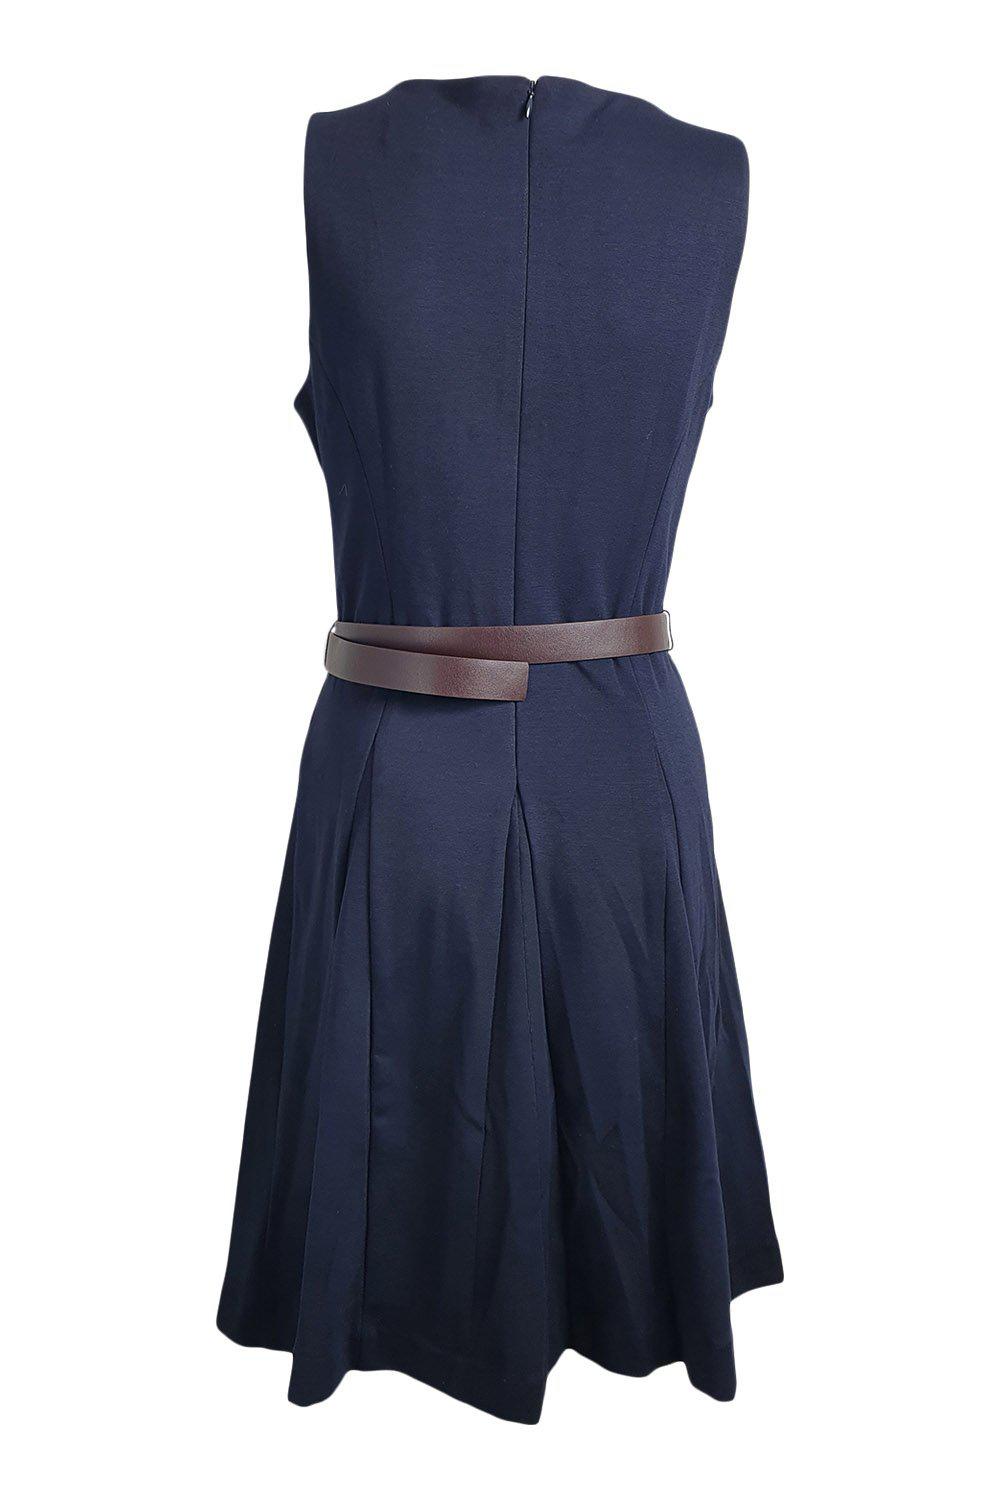 MICHAEL KORS Navy Blue Fit and Flare Belted Sleeveless Dress (6)-Michael Kors-The Freperie